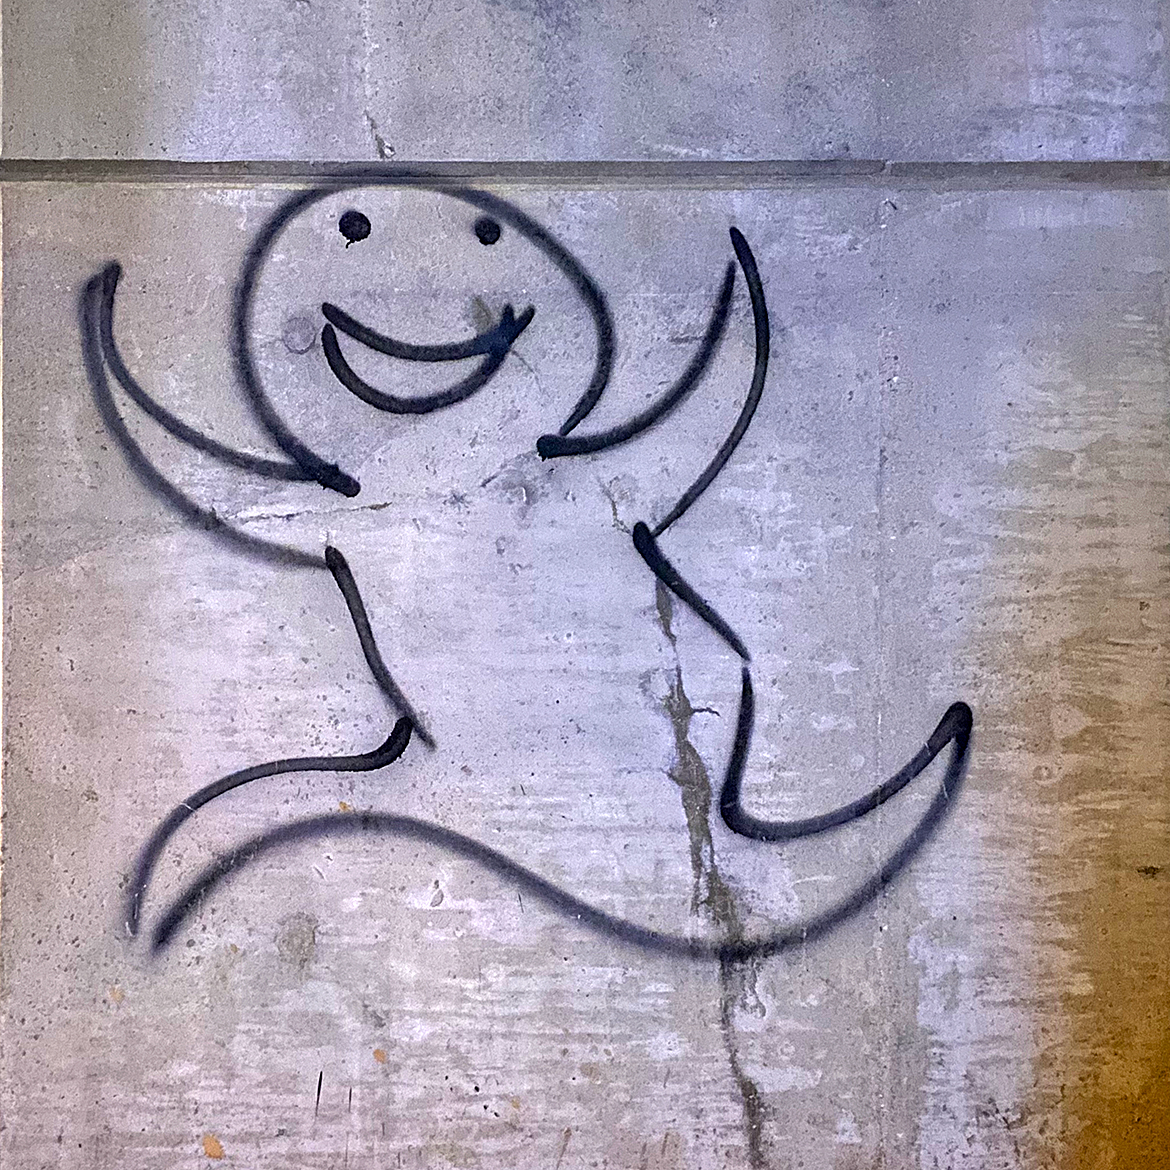 Spray paint graffiti of a smiling happy ghost skipping along in a single black line